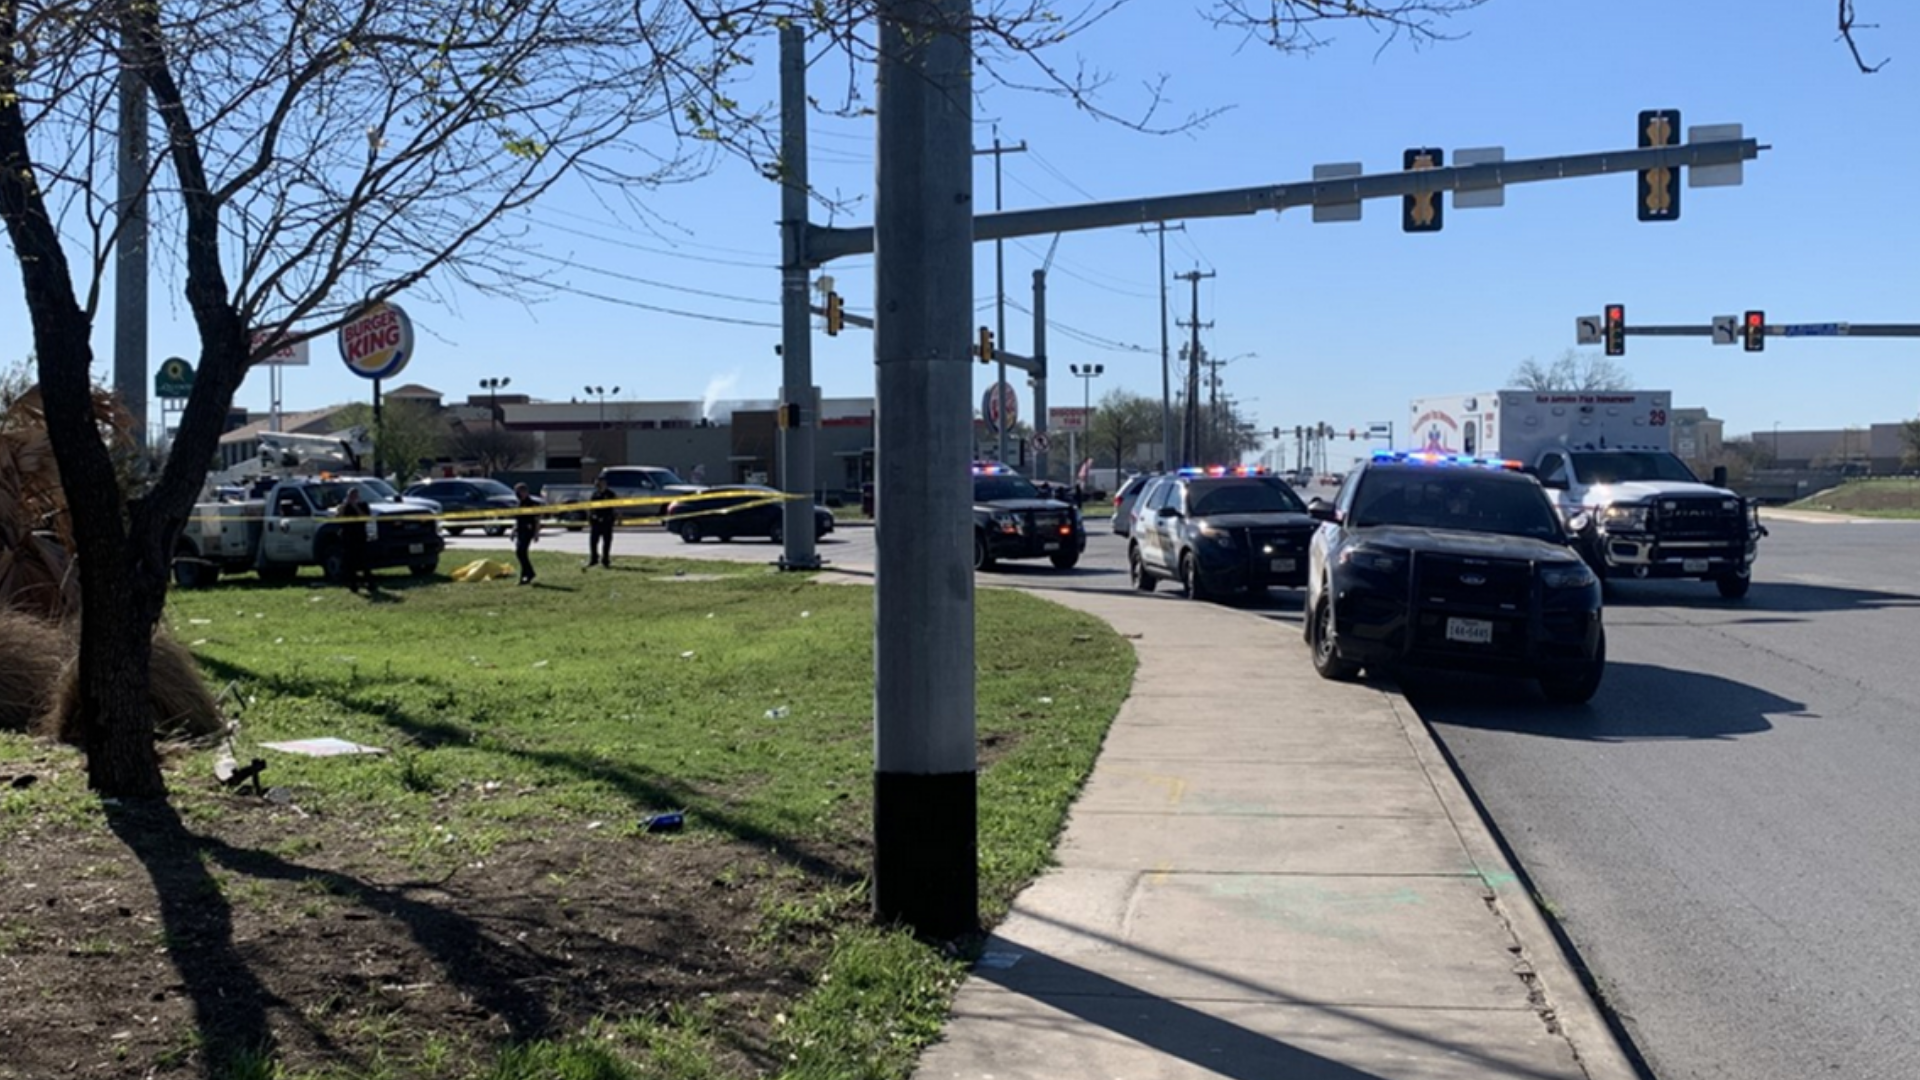 The San Antonio Police Department responded to a fatal car accident on the city's southeast side.